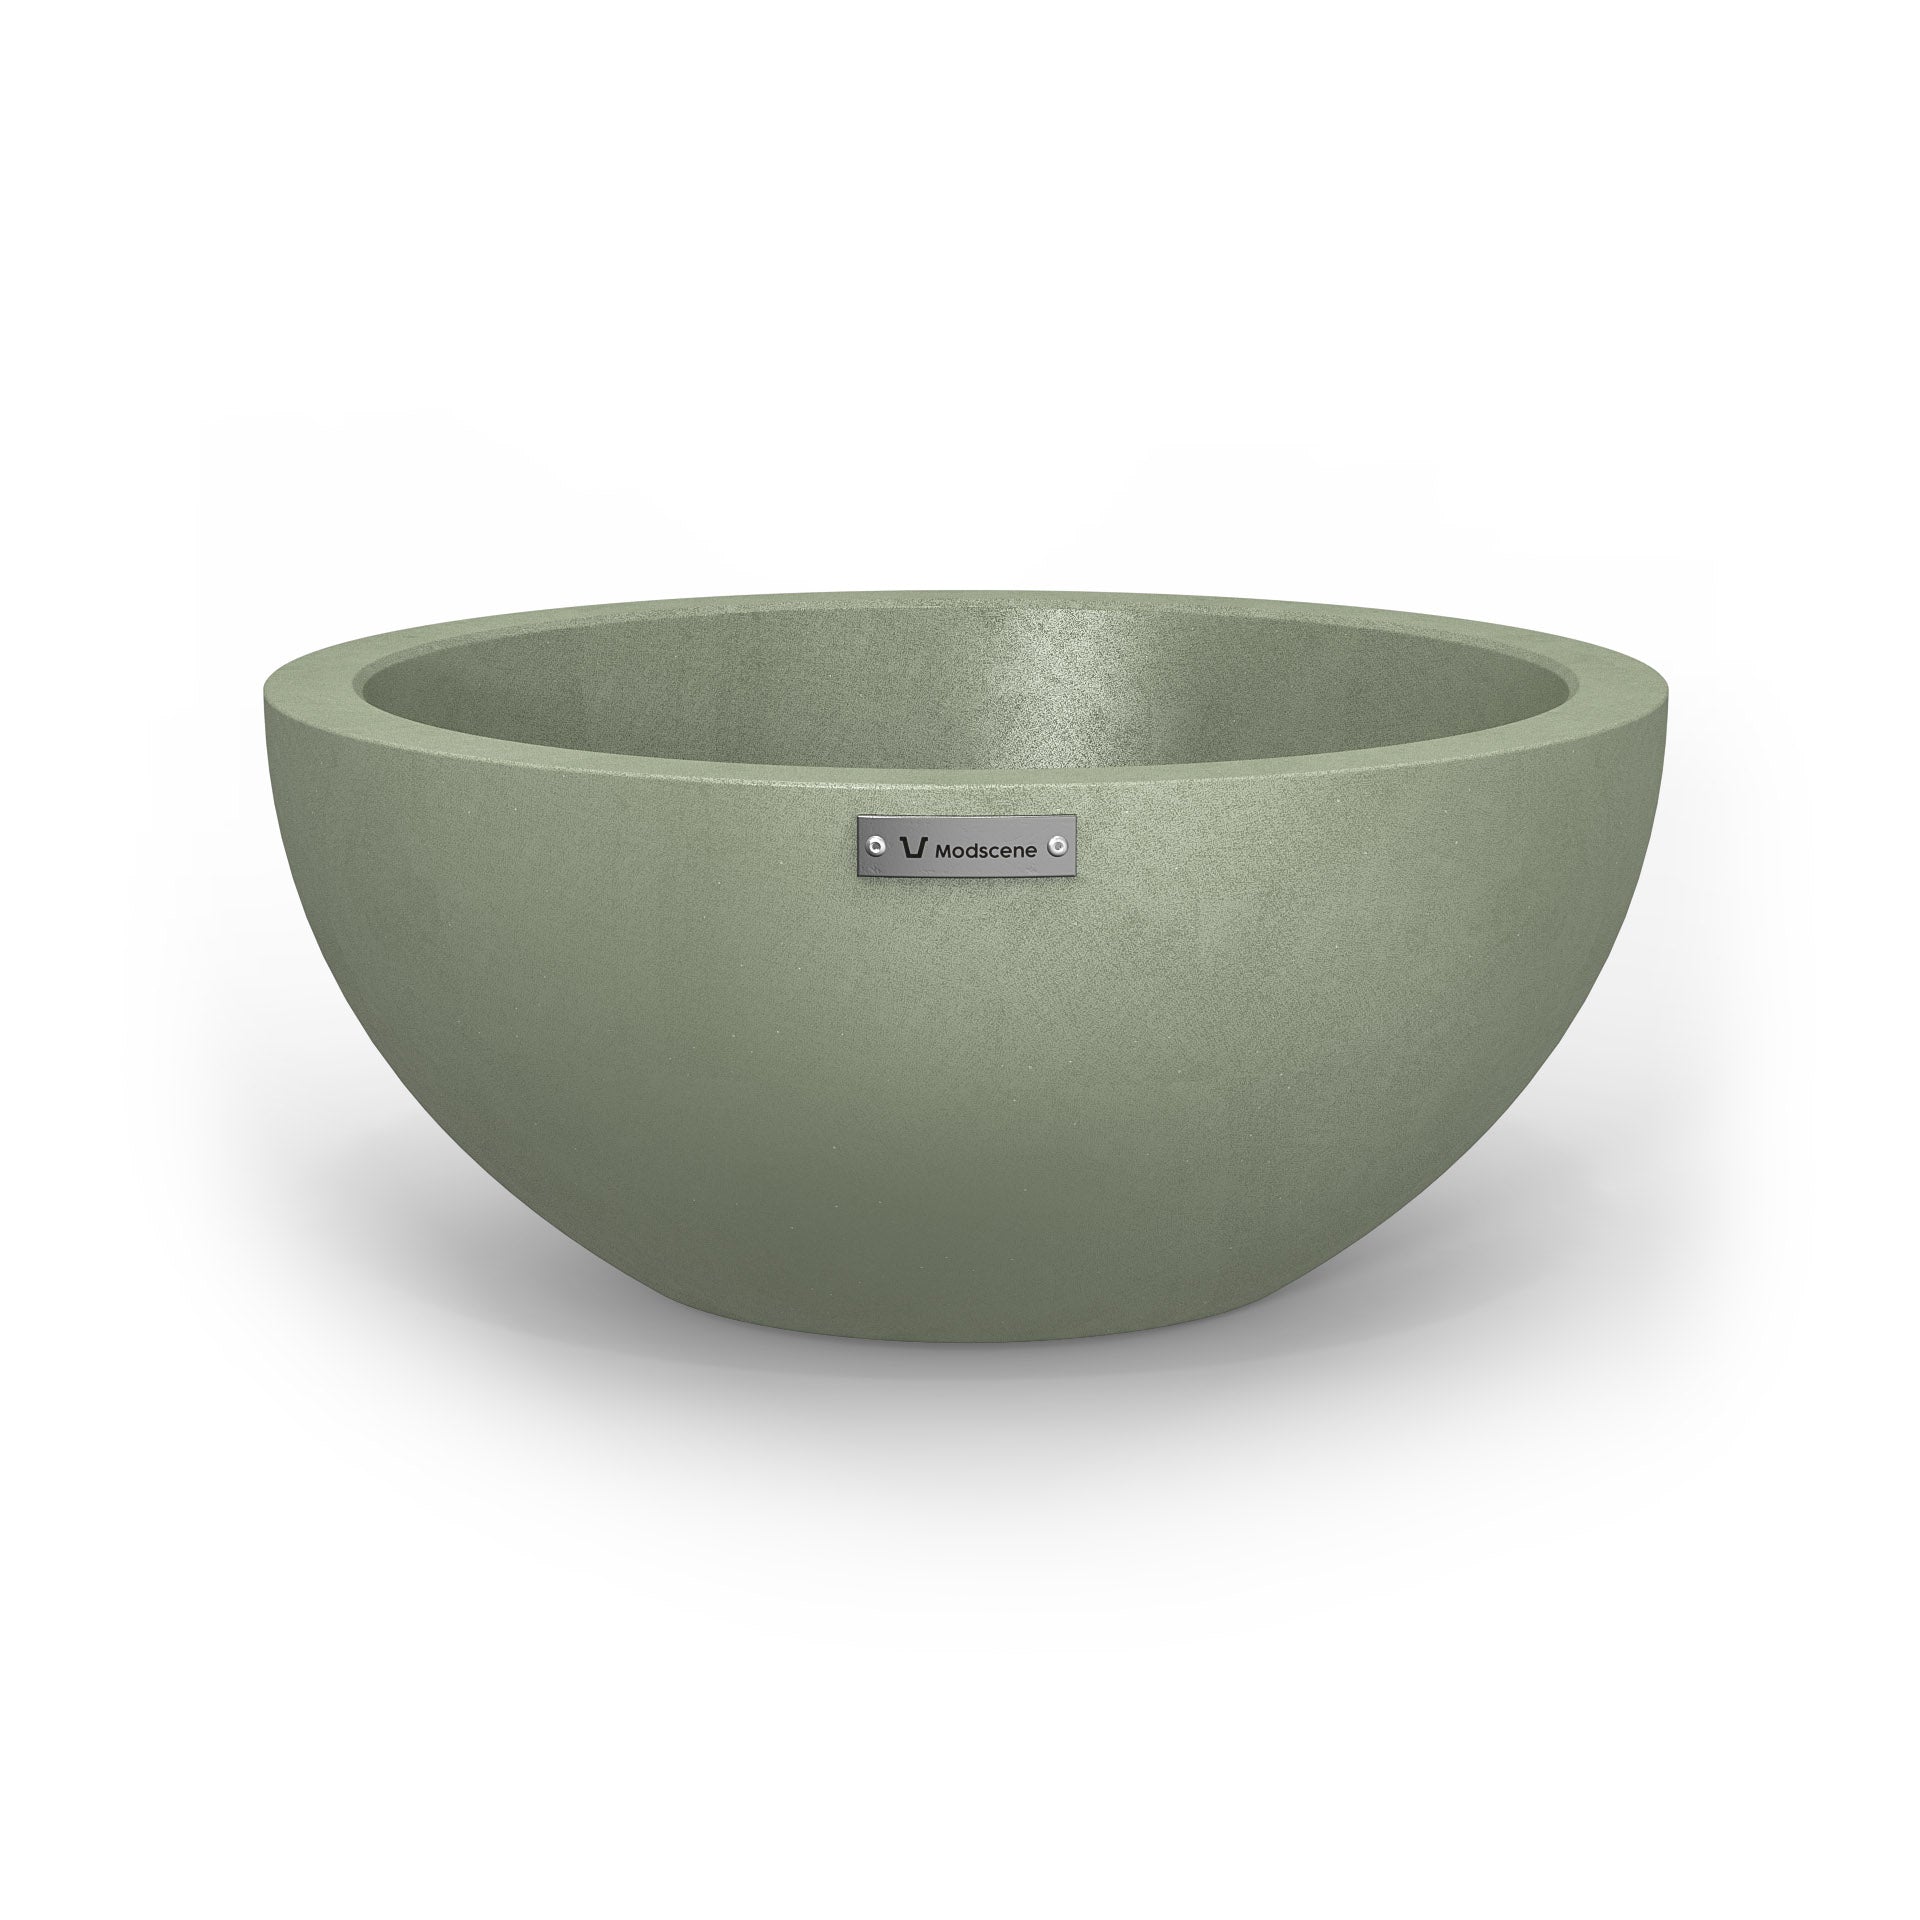 A small Modscene planter bowl in pastel green with a concrete look finish.